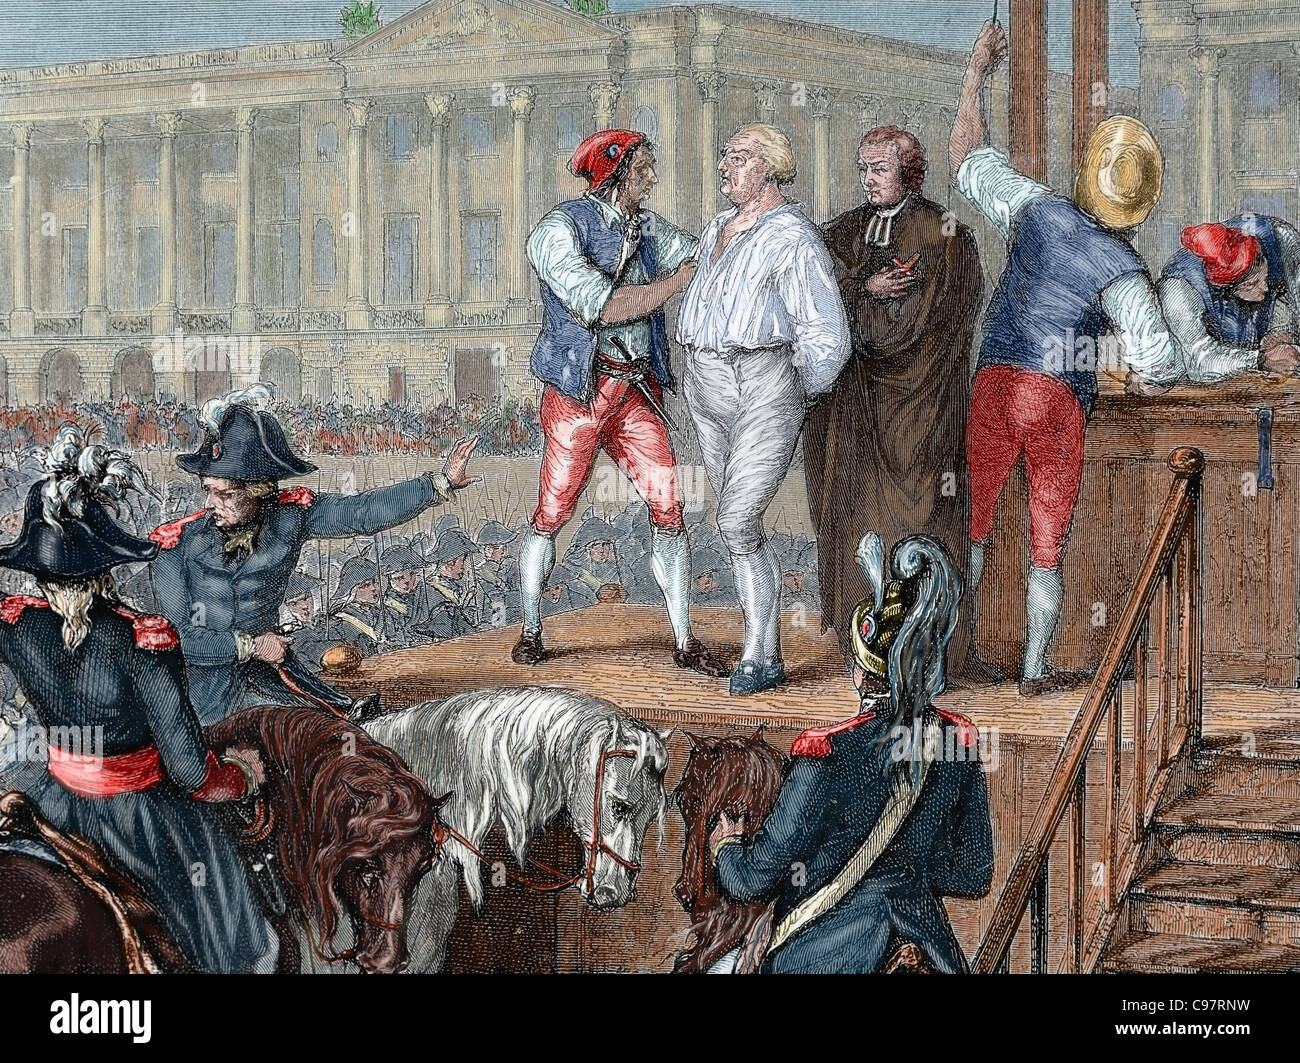 French Revolution. Execution of King Louis XVI (1754-1793) on January 21, 1793. Colored engraving. Stock Photo